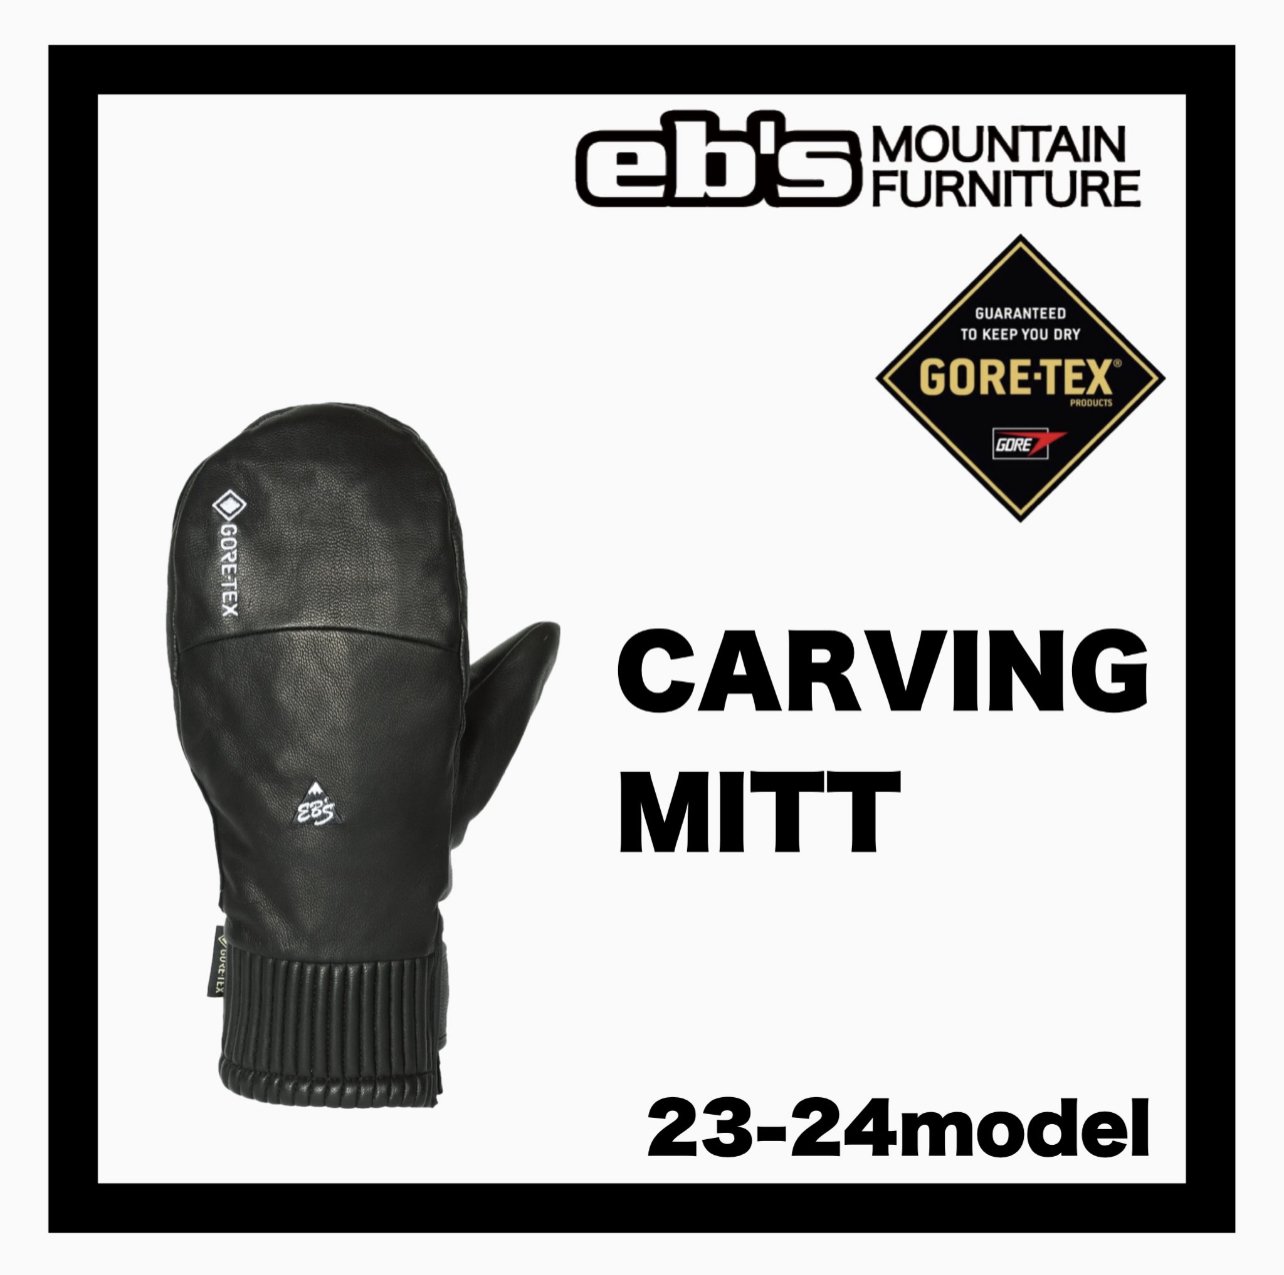 <img class='new_mark_img1' src='https://img.shop-pro.jp/img/new/icons34.gif' style='border:none;display:inline;margin:0px;padding:0px;width:auto;' />eb'sCARVING MITT BLACK